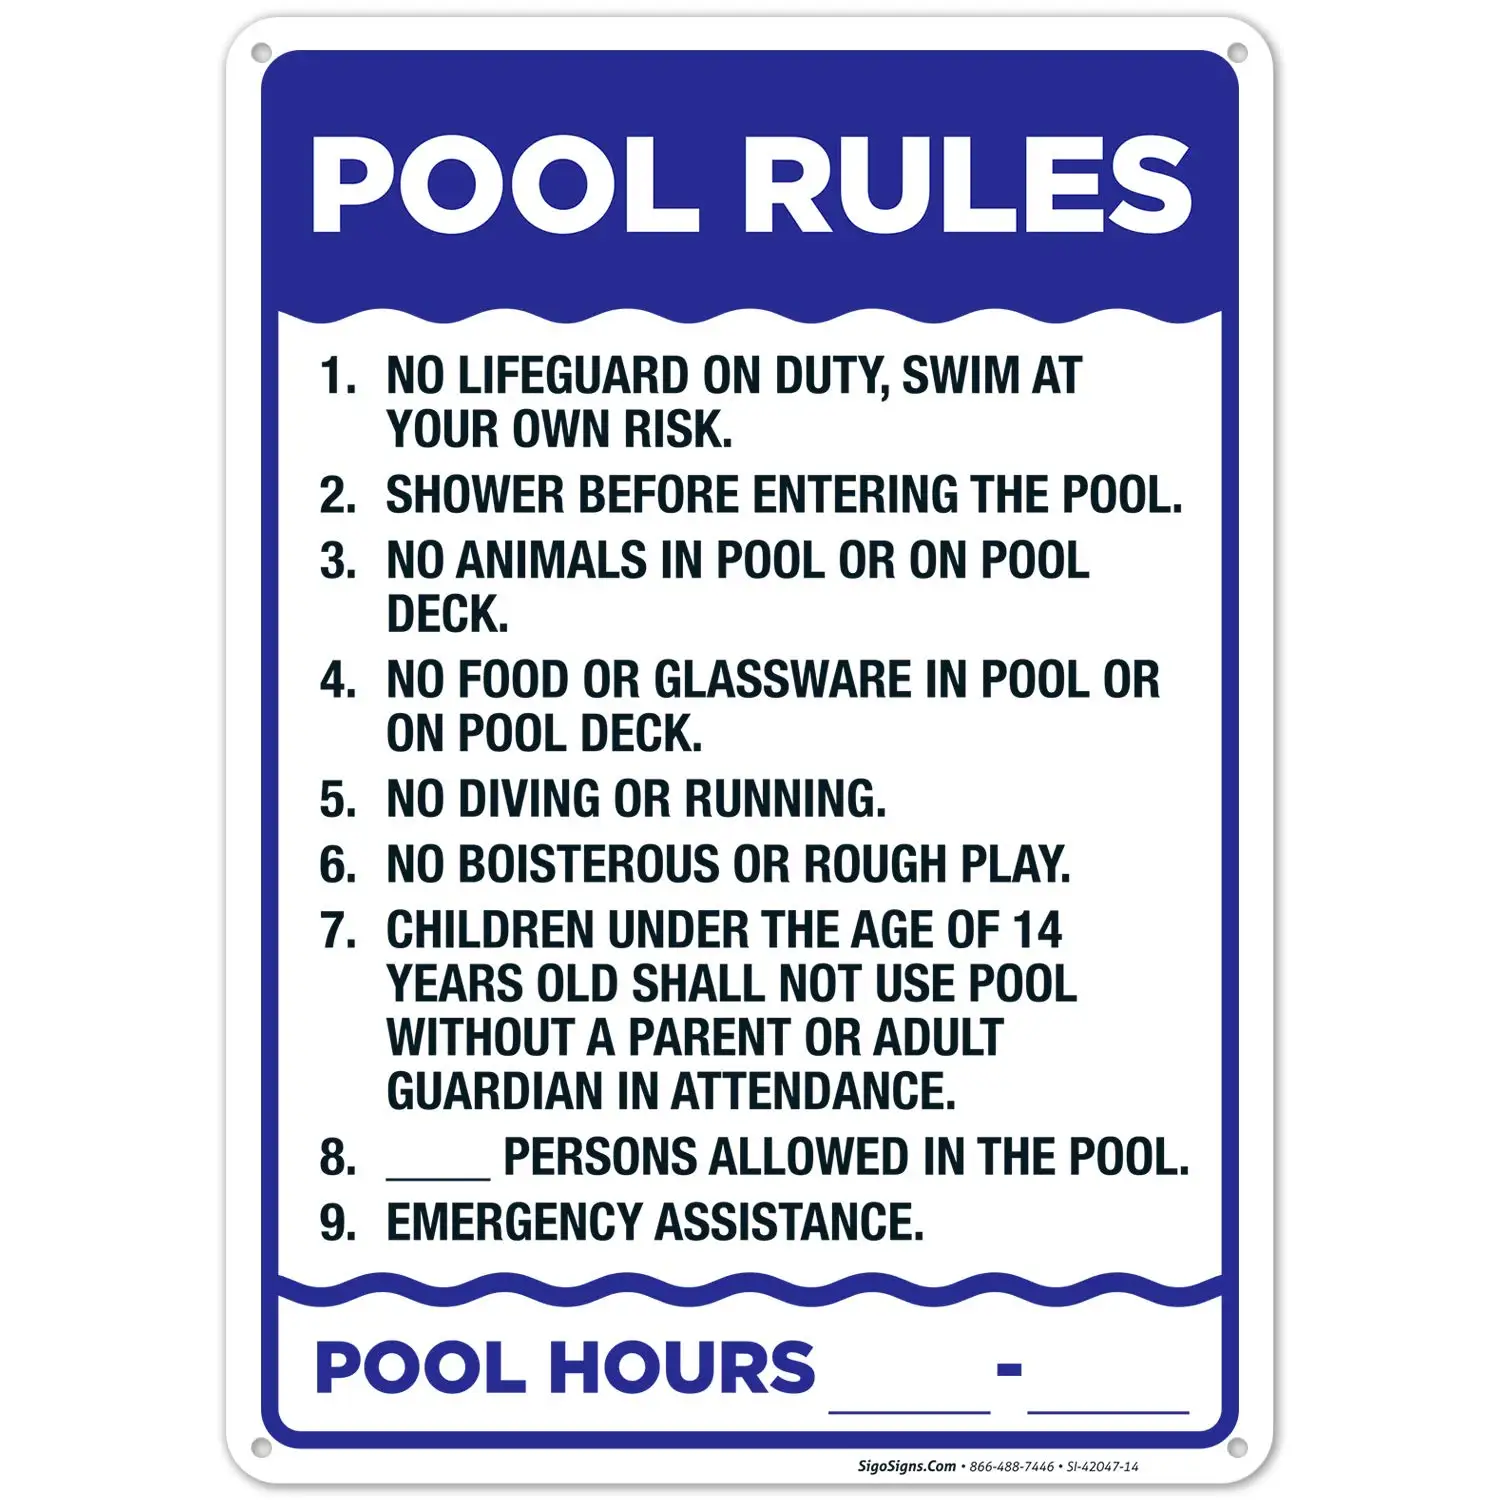 

Pool Rules Sign, Pool Sign Rust Free Aluminum Weather/Fade Resistant Easy Mounting Indoor/Outdoor Use Made in USA by Sigo Signs